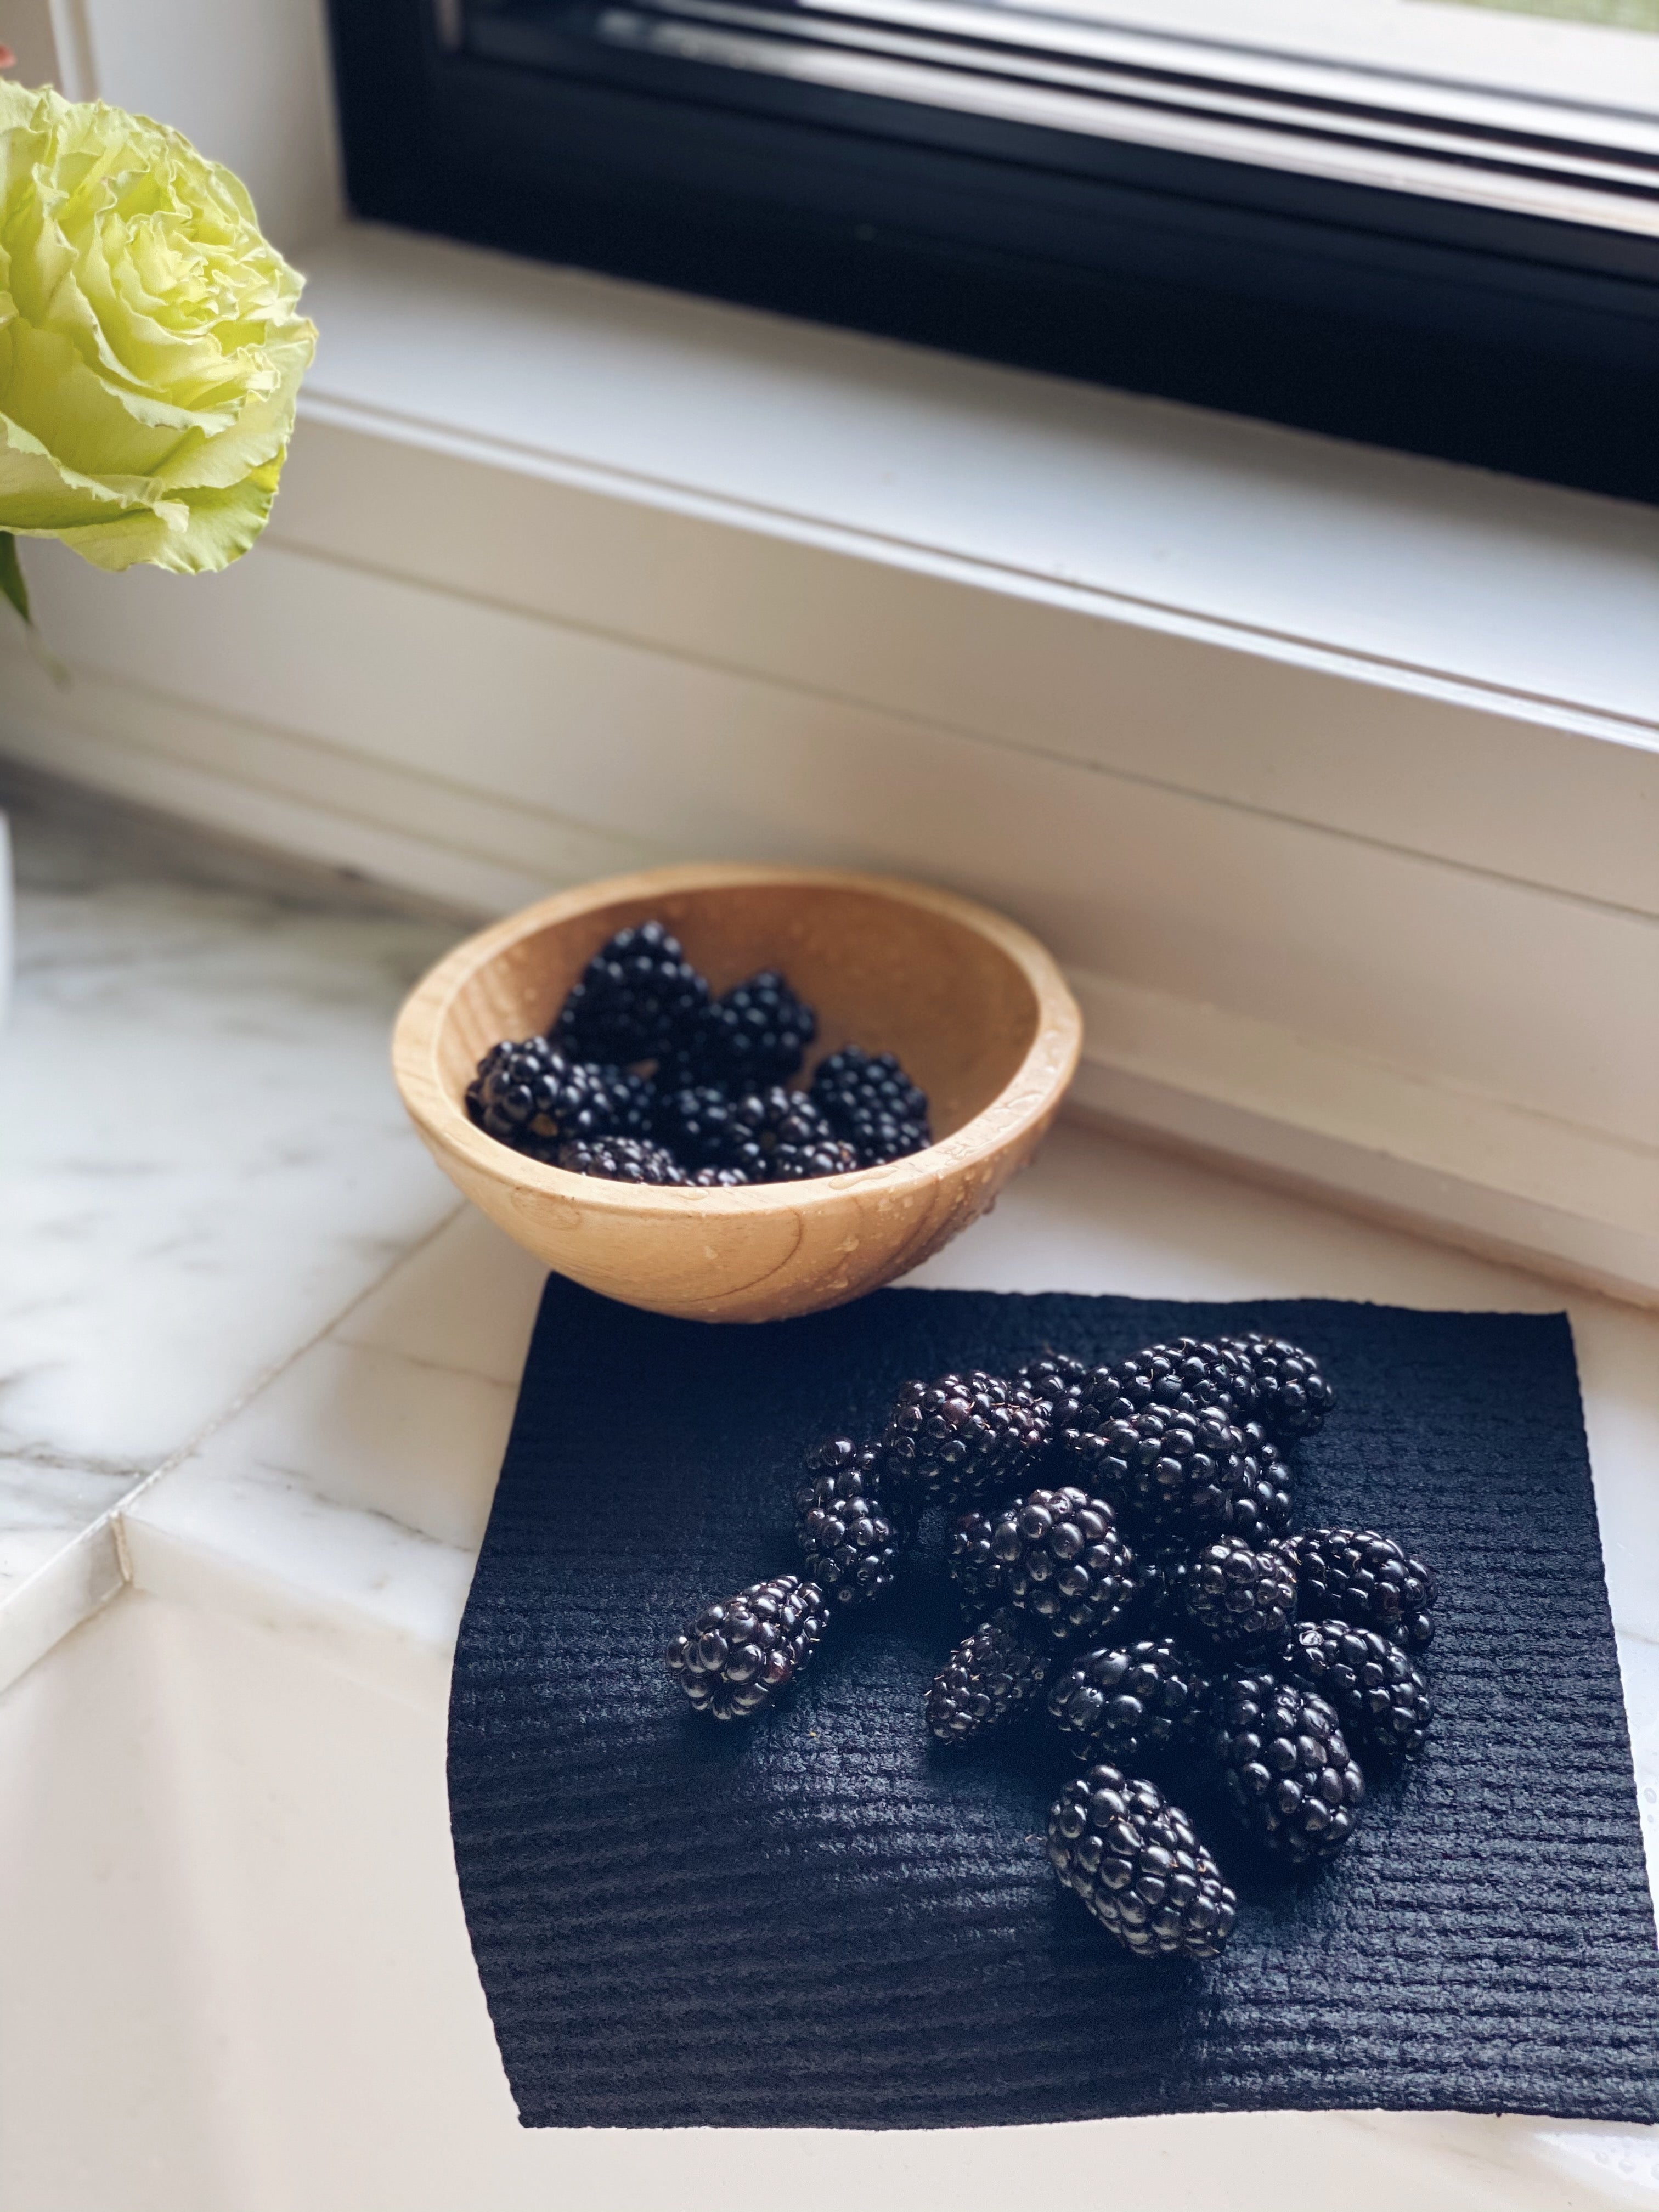 Solid Black Sponge Cloth hangs over the back of the sink.  On top of the cloth are freshly washed Blackberry that are drying on the cloth.  To the top left of the image is a wooden bowl  of blackberries.  In the background you can see the light streaming onto the window sill and on the far left is an image of green roses cut off.